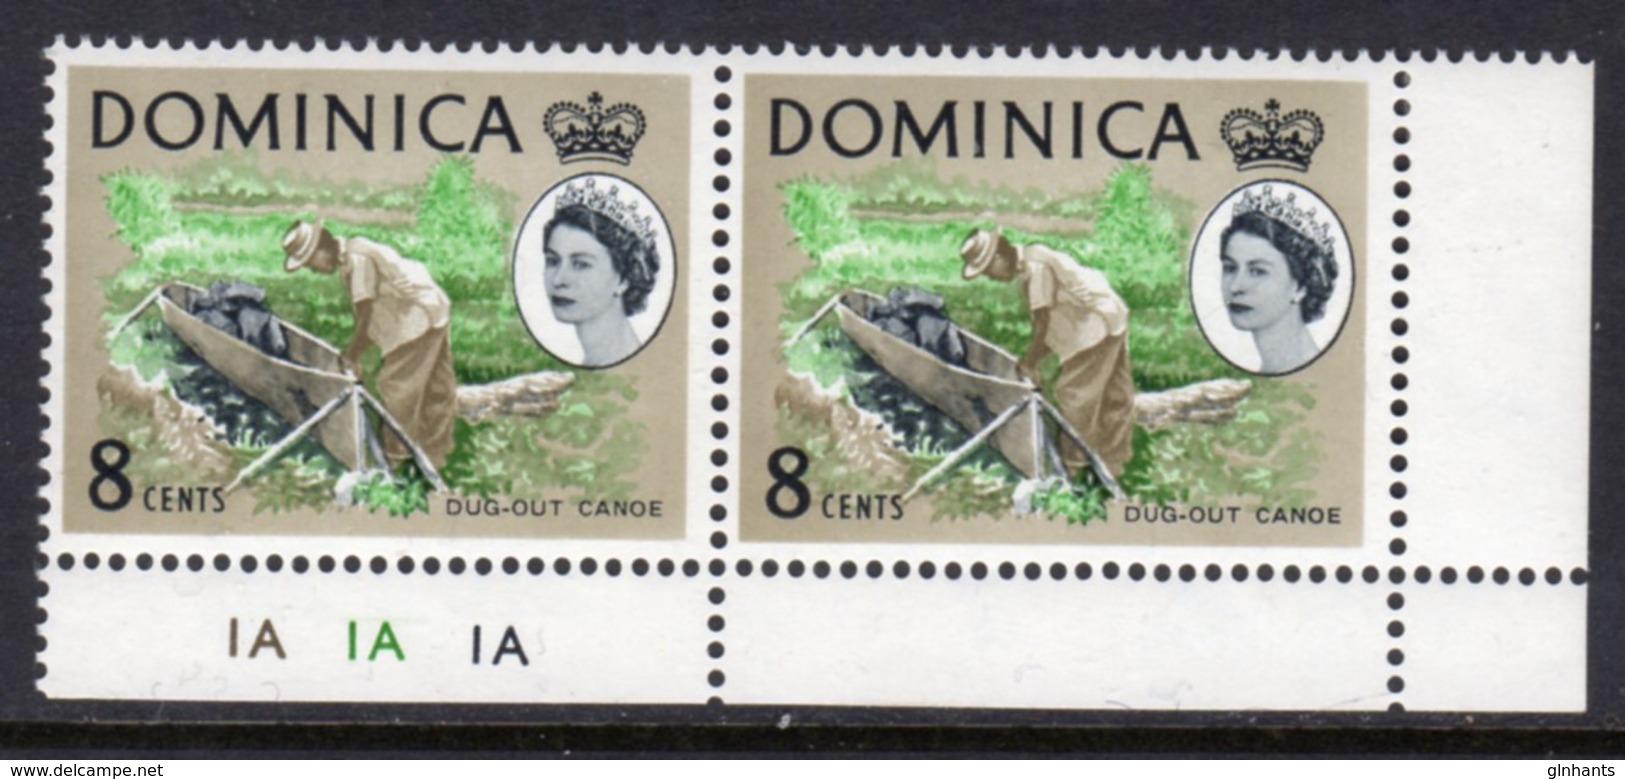 DOMINICA - 1963 QE II DEFINITIVE 8c STAMP PAIR WITH PLATE NO COLOUR CONTROLS FINE MNH ** SG168 X 2 - Dominica (...-1978)